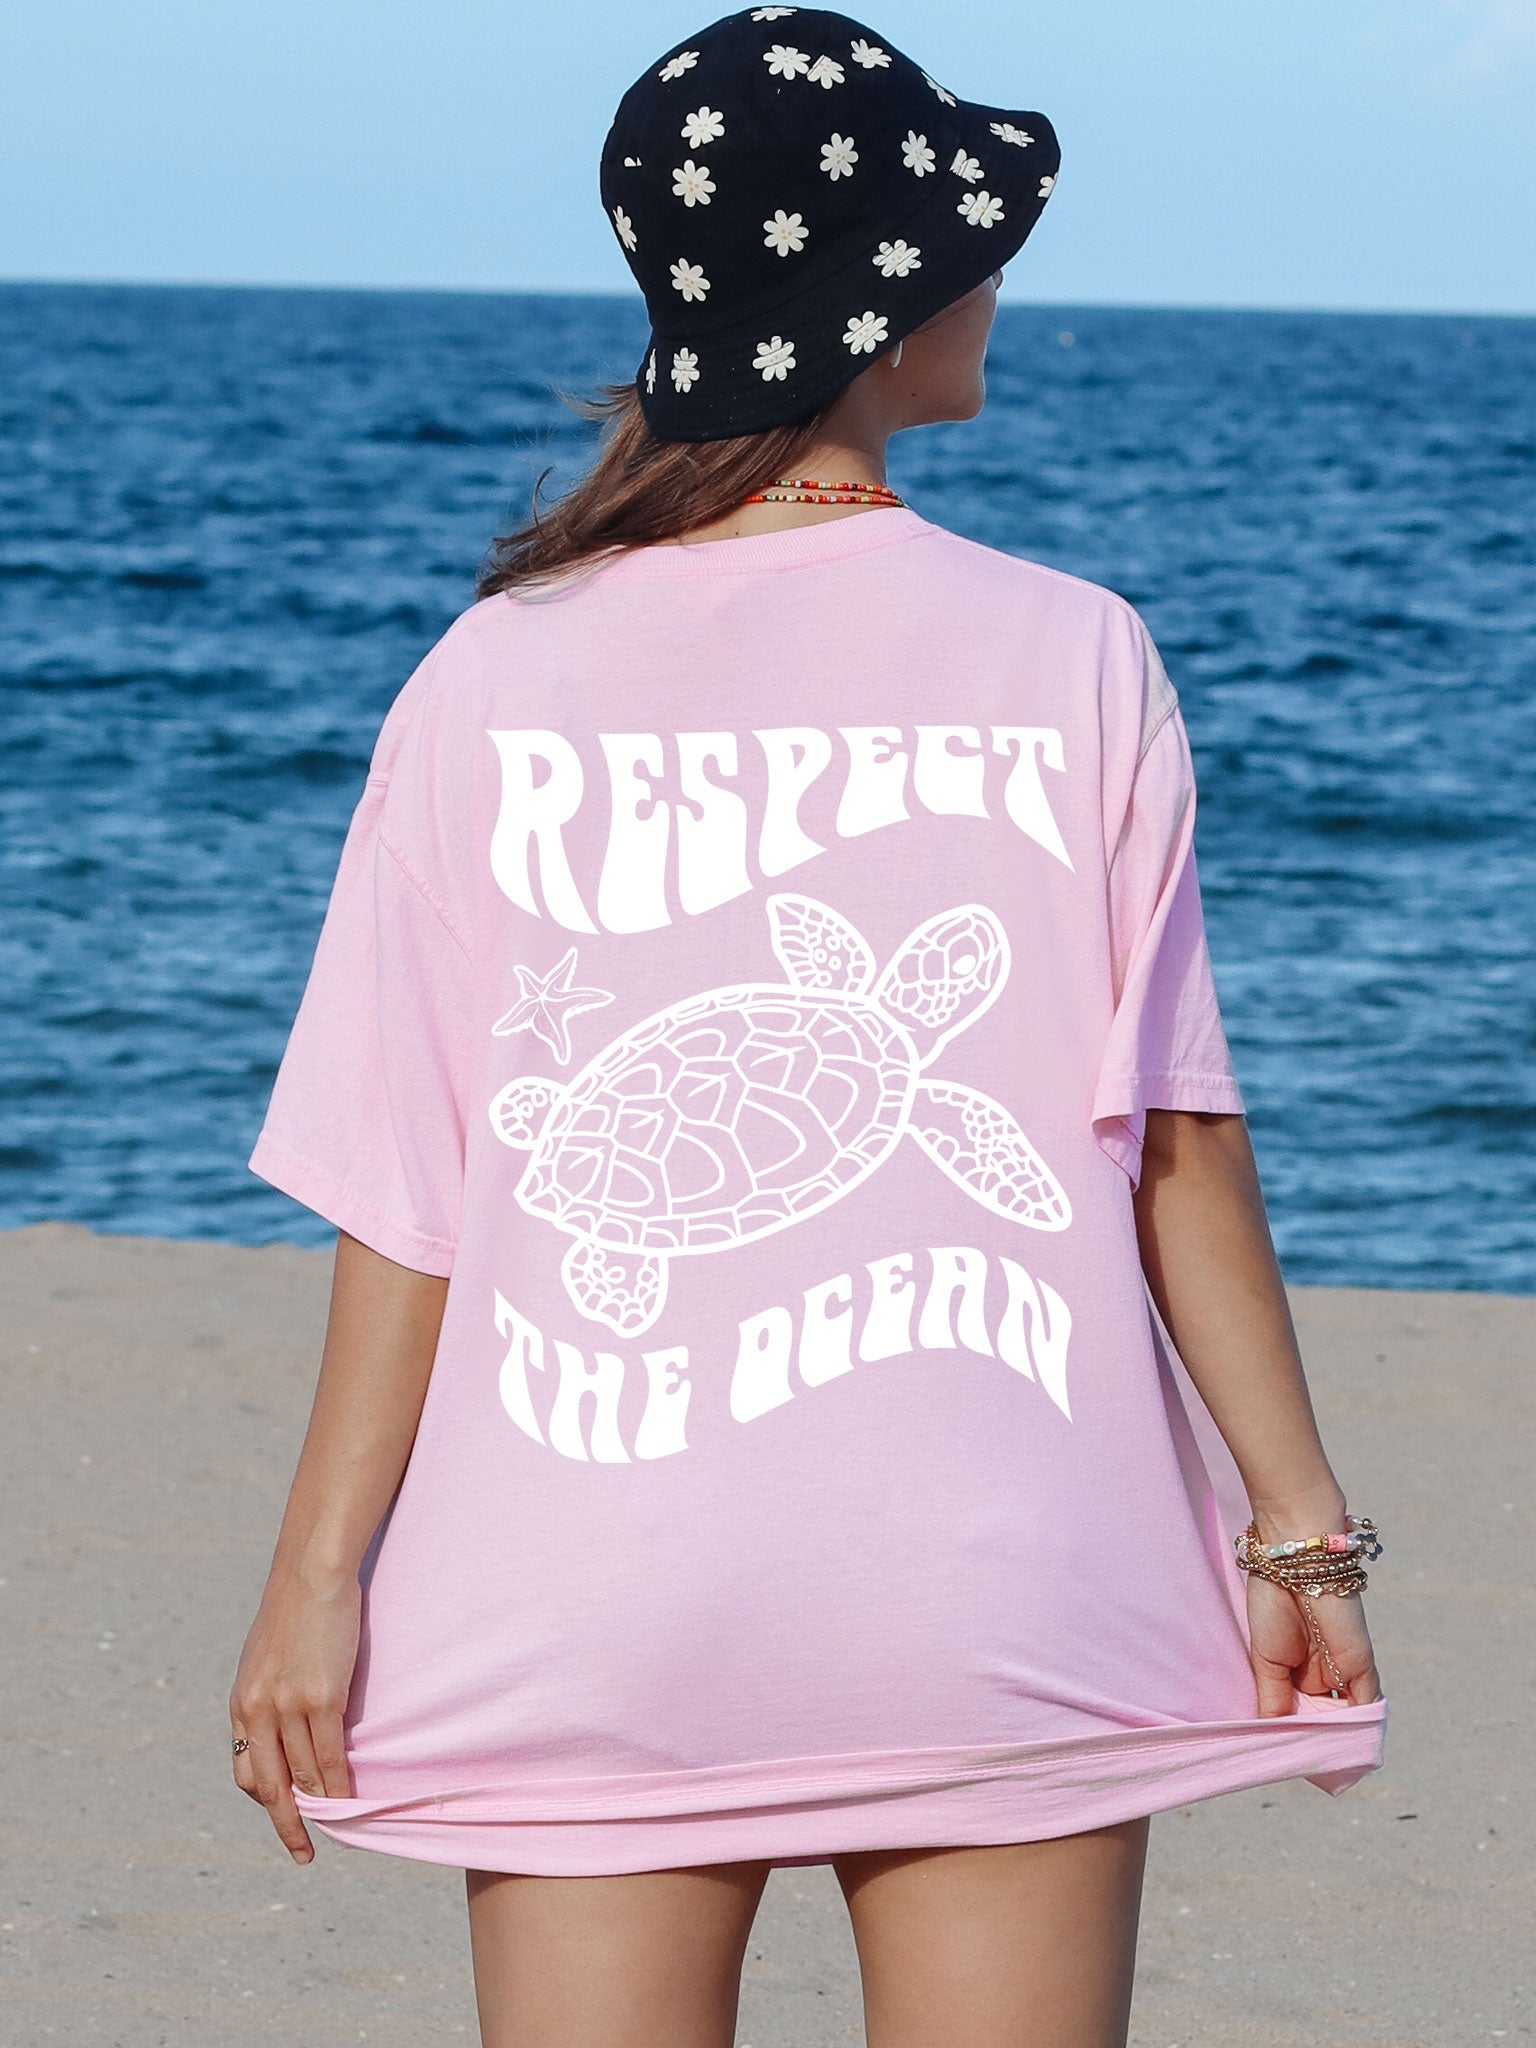 Respect The Ocean Sea Turtle Comfort Colors® Tshirt – Meaningful